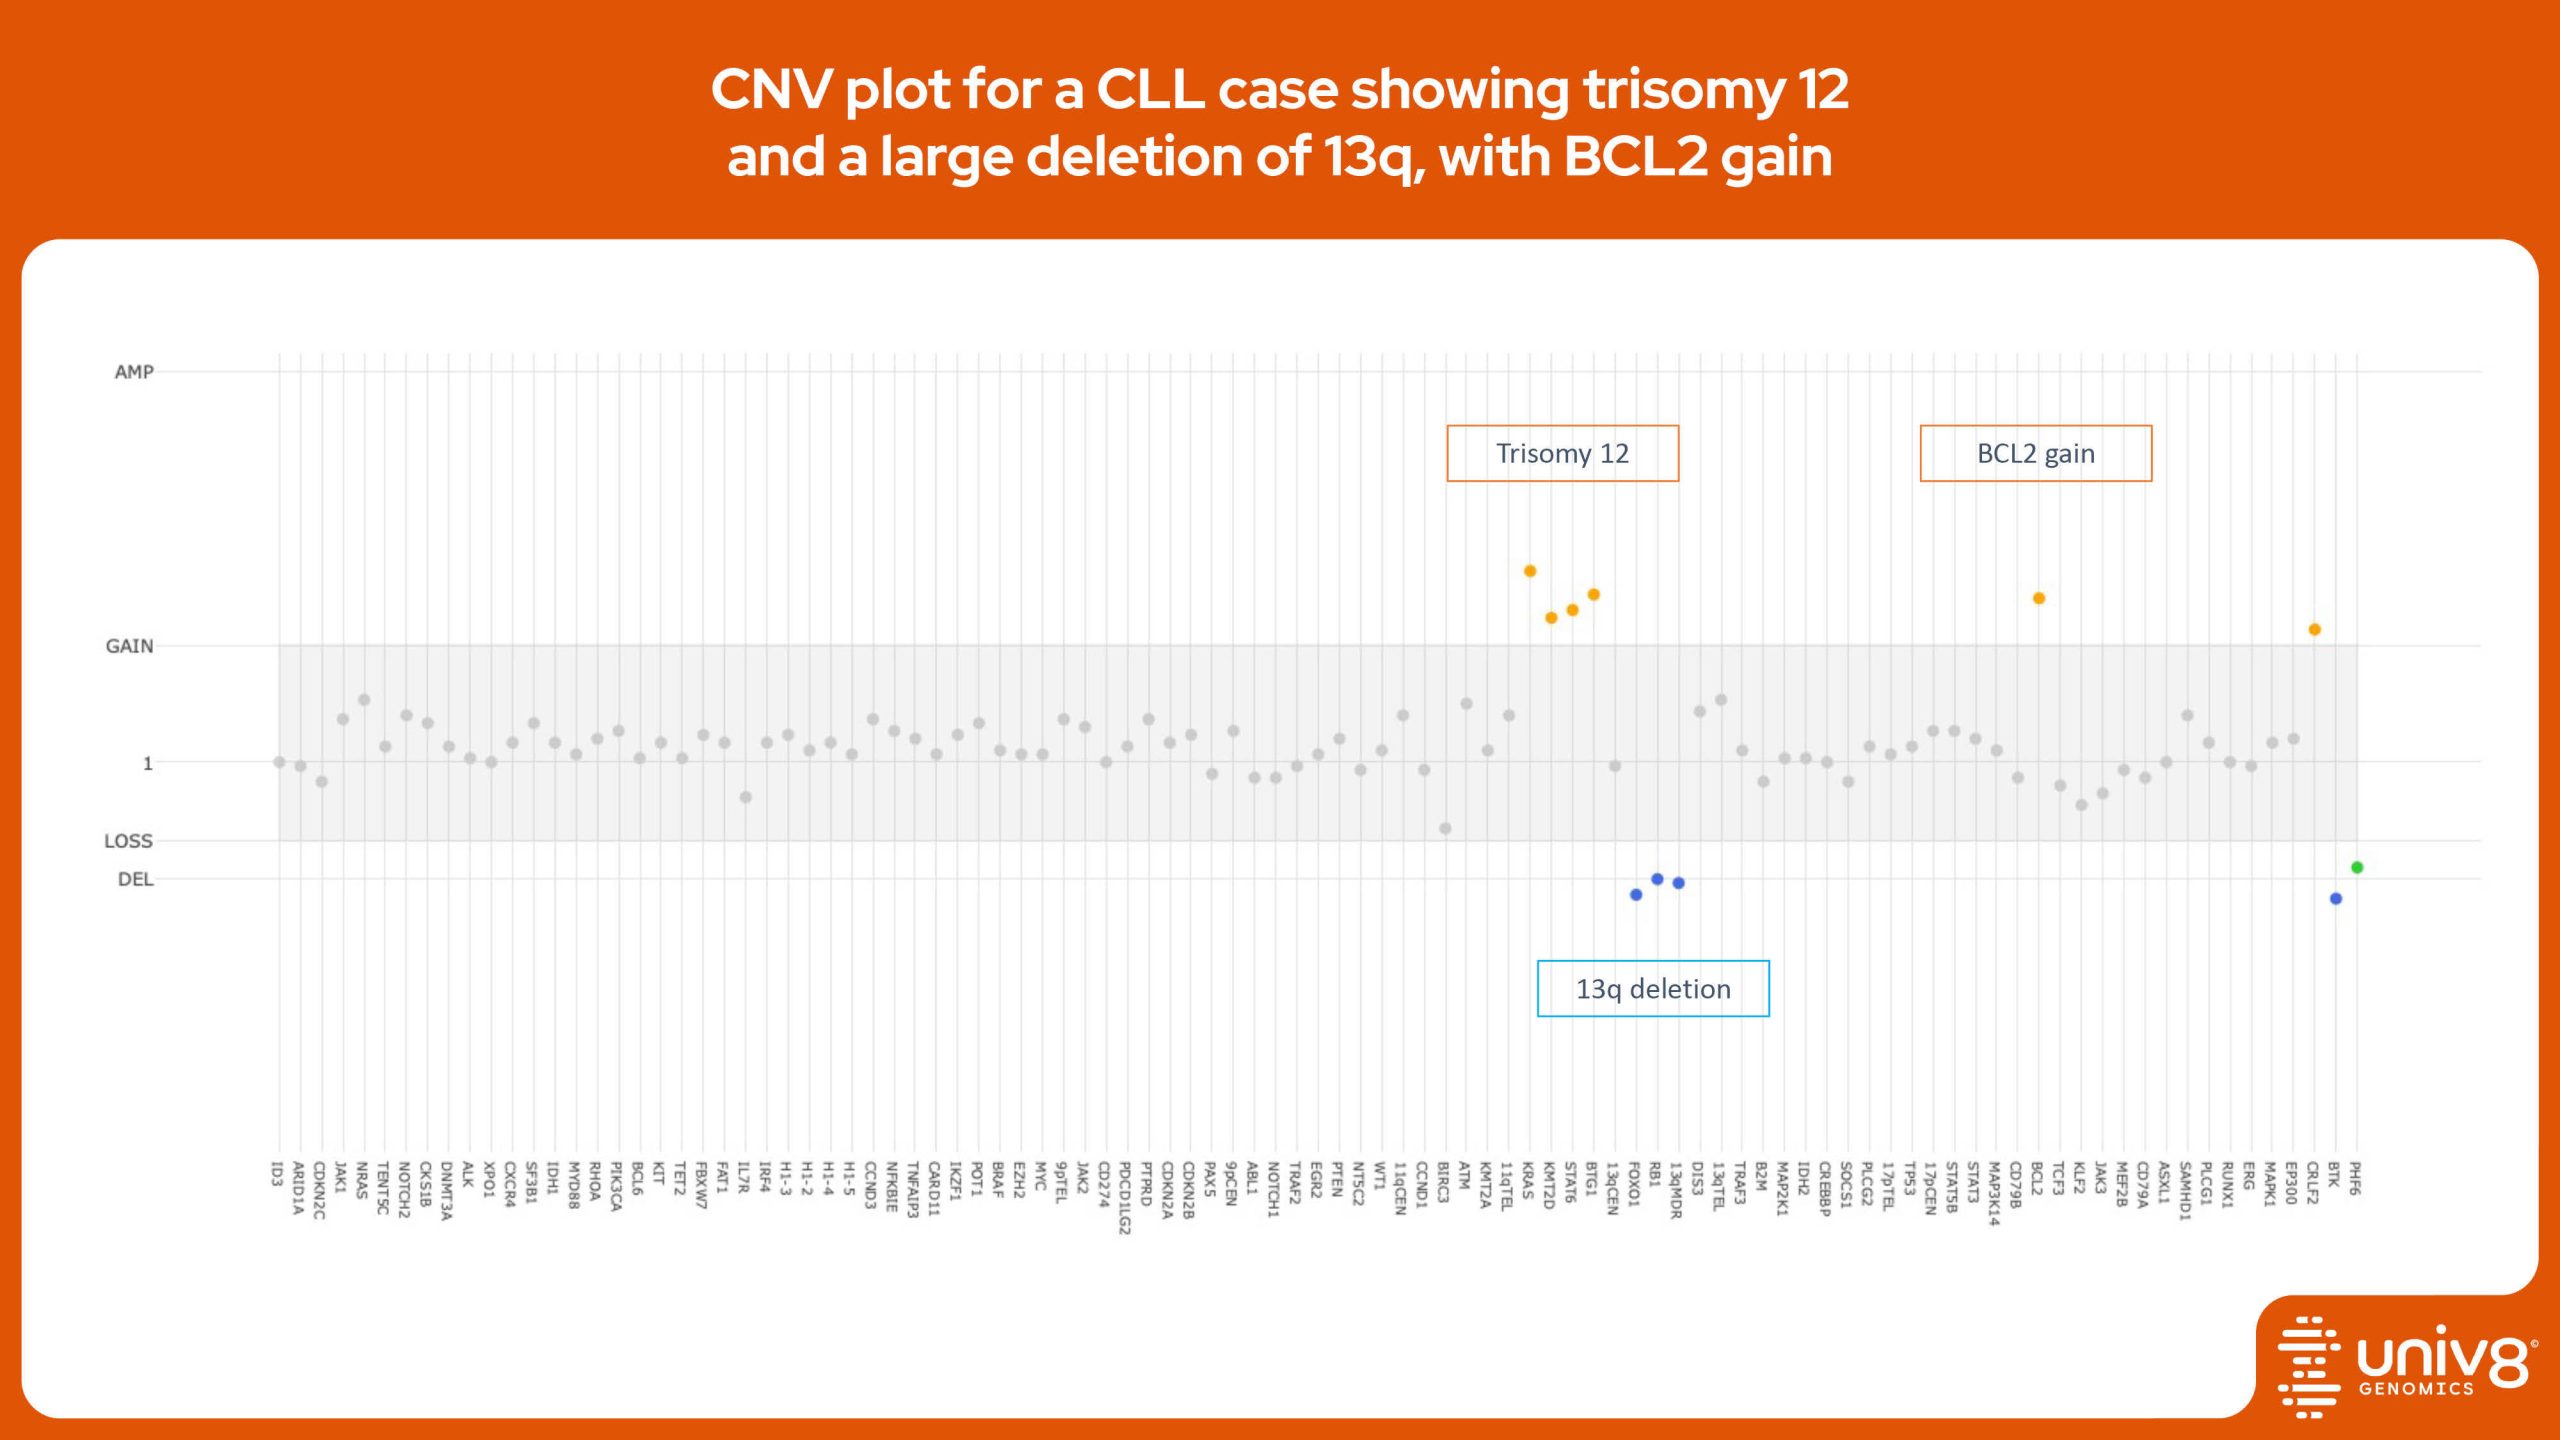 CNA plot for a CLL case showing trisomy 12 and a large deletion of 13q, with BCL2 gain